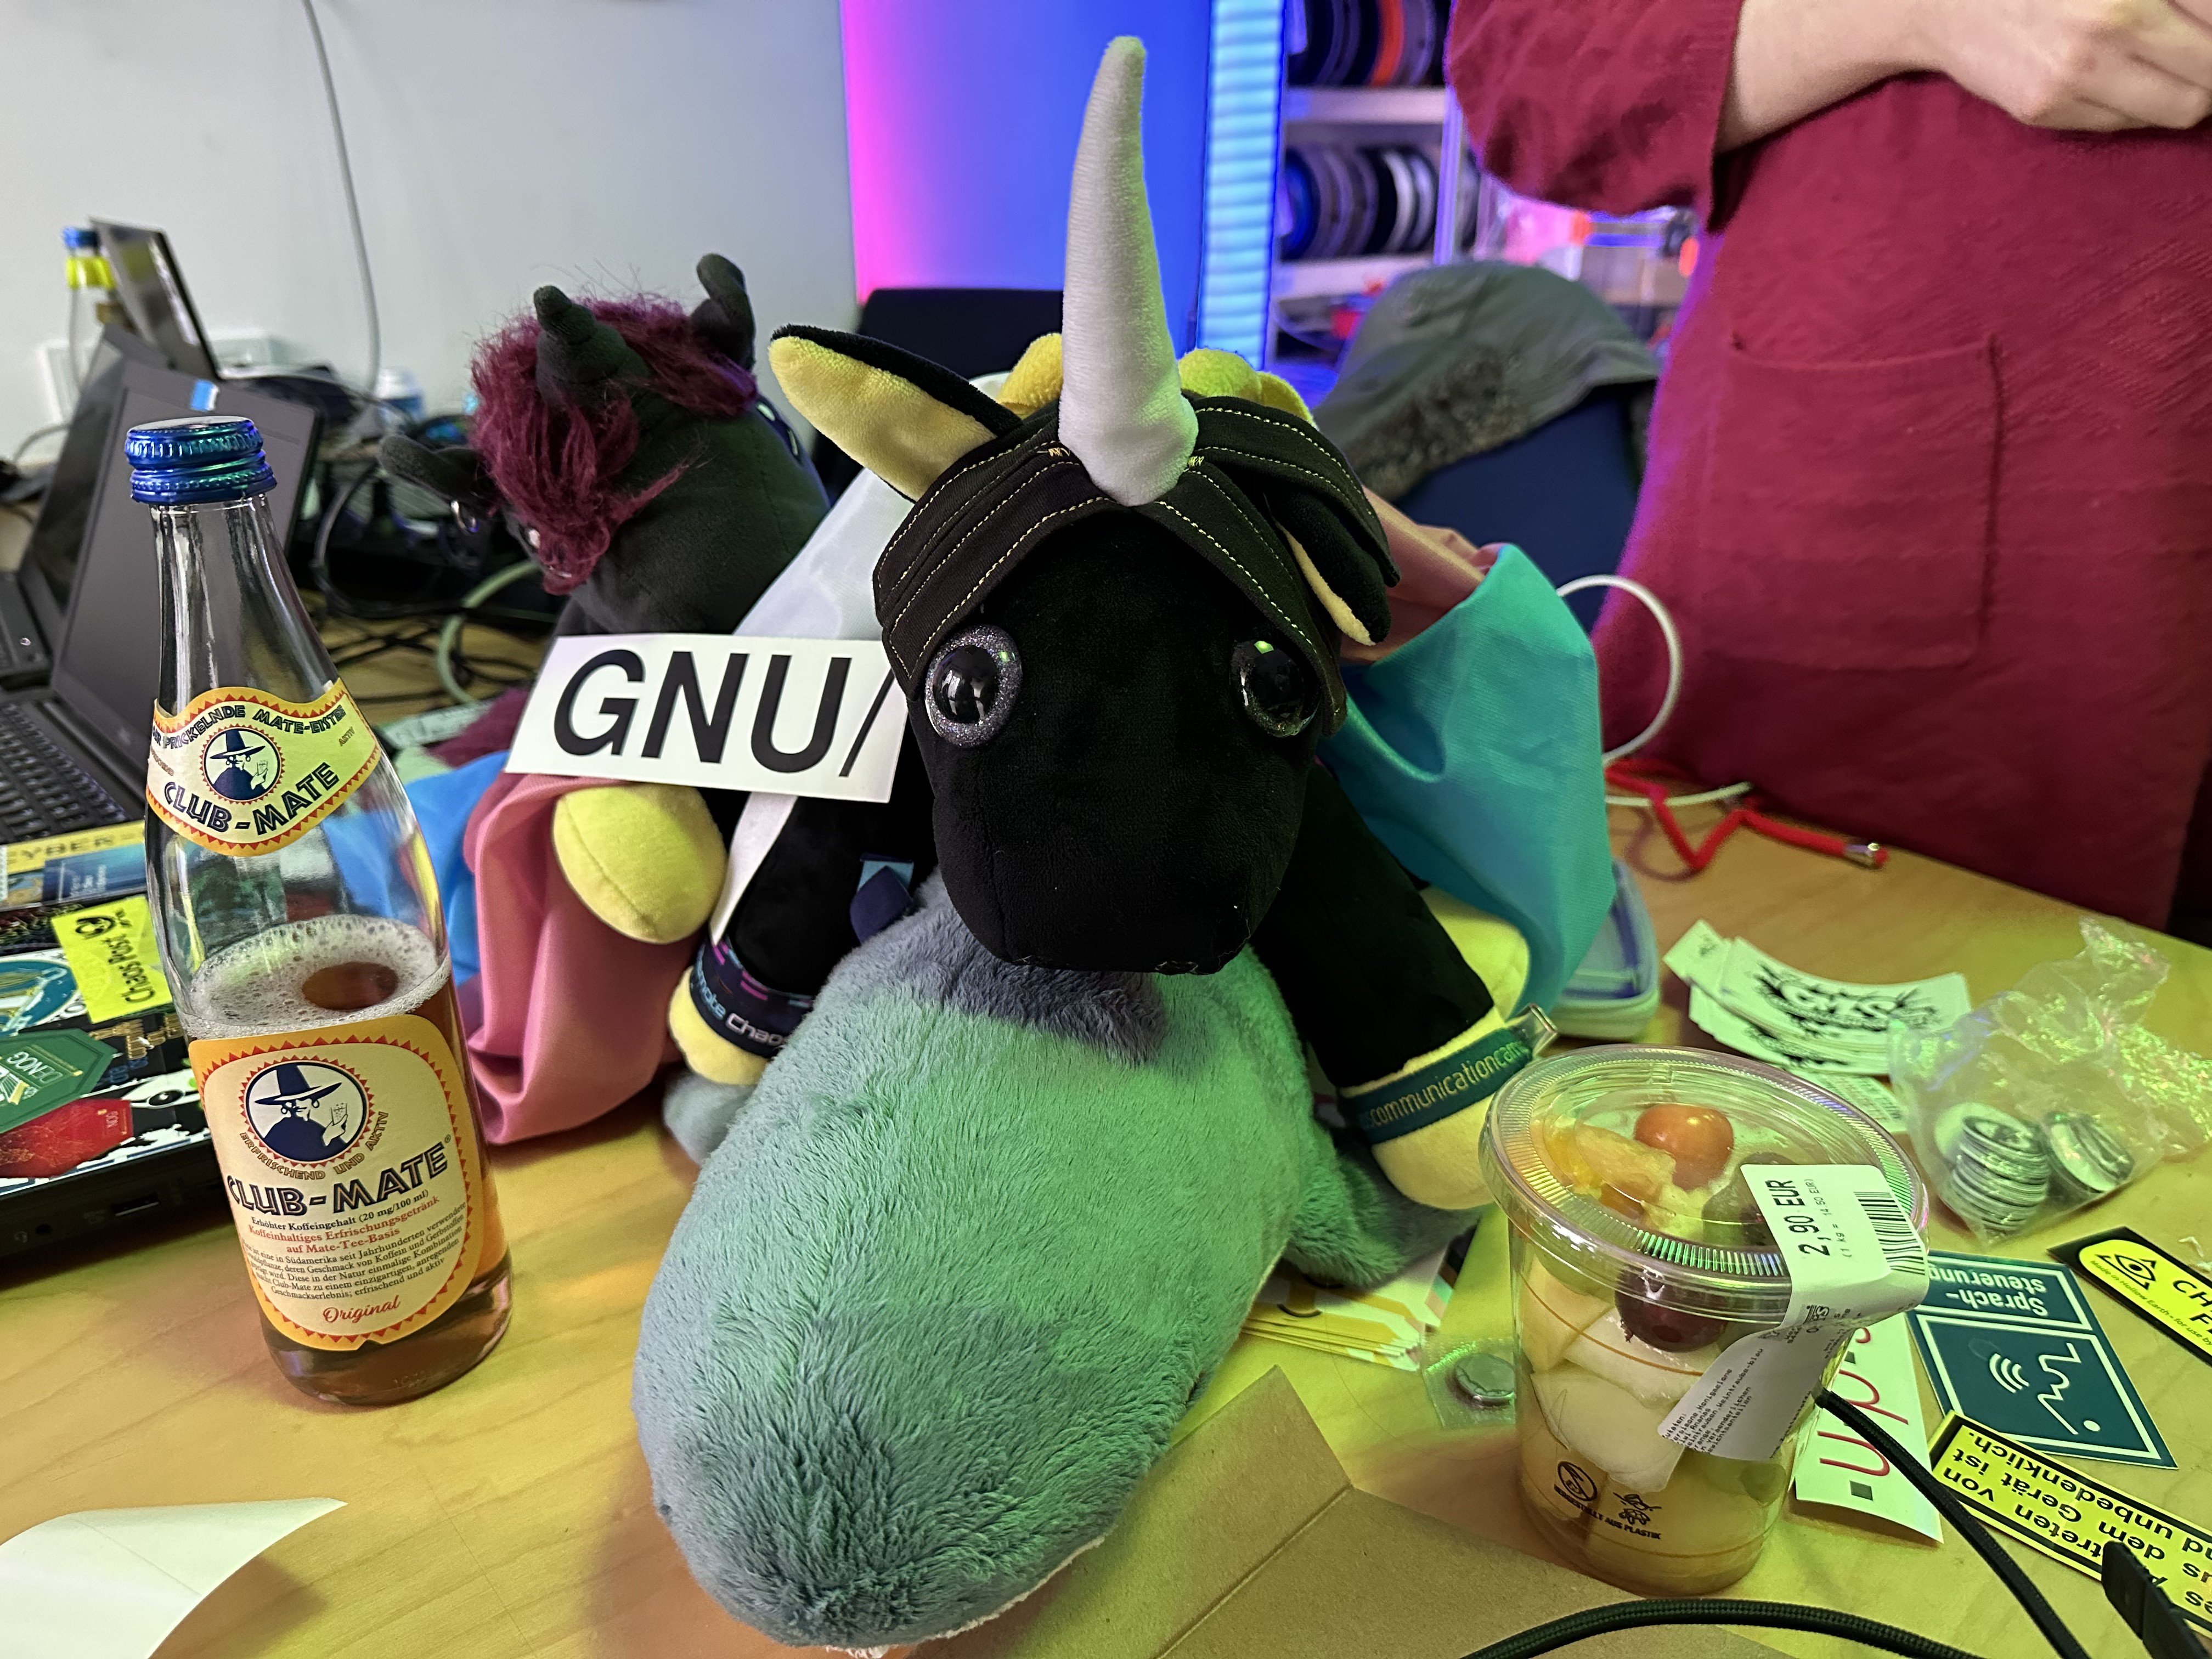 A GNU/Sticker next to Ida (black unicorn with yellow accents) on a smolhaj. There is a bottle of mate and some sticker around, another Unicorn and a transflag in the background of the pile